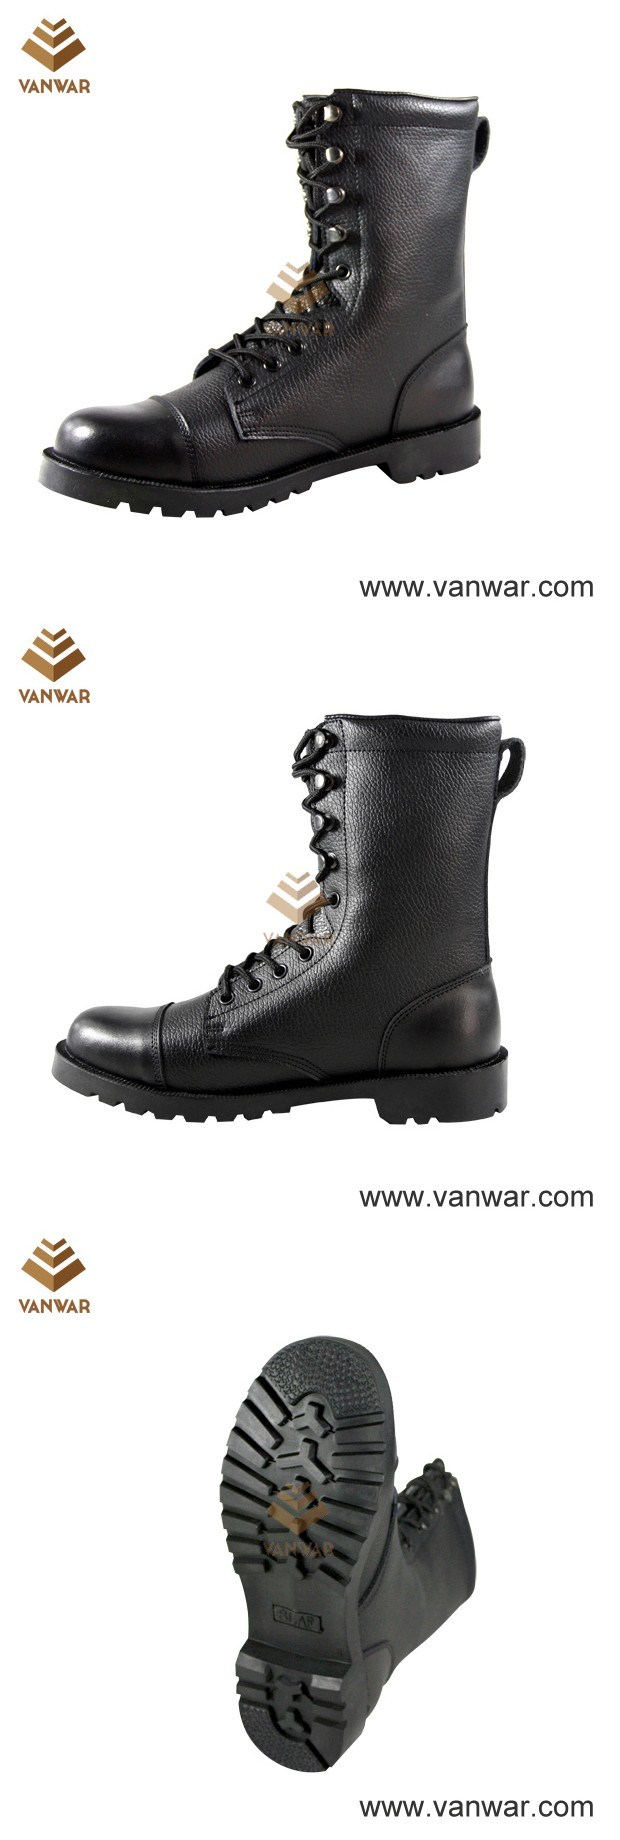 Full Leather Black Military Combat Boots for Army Soliders (WCB029)